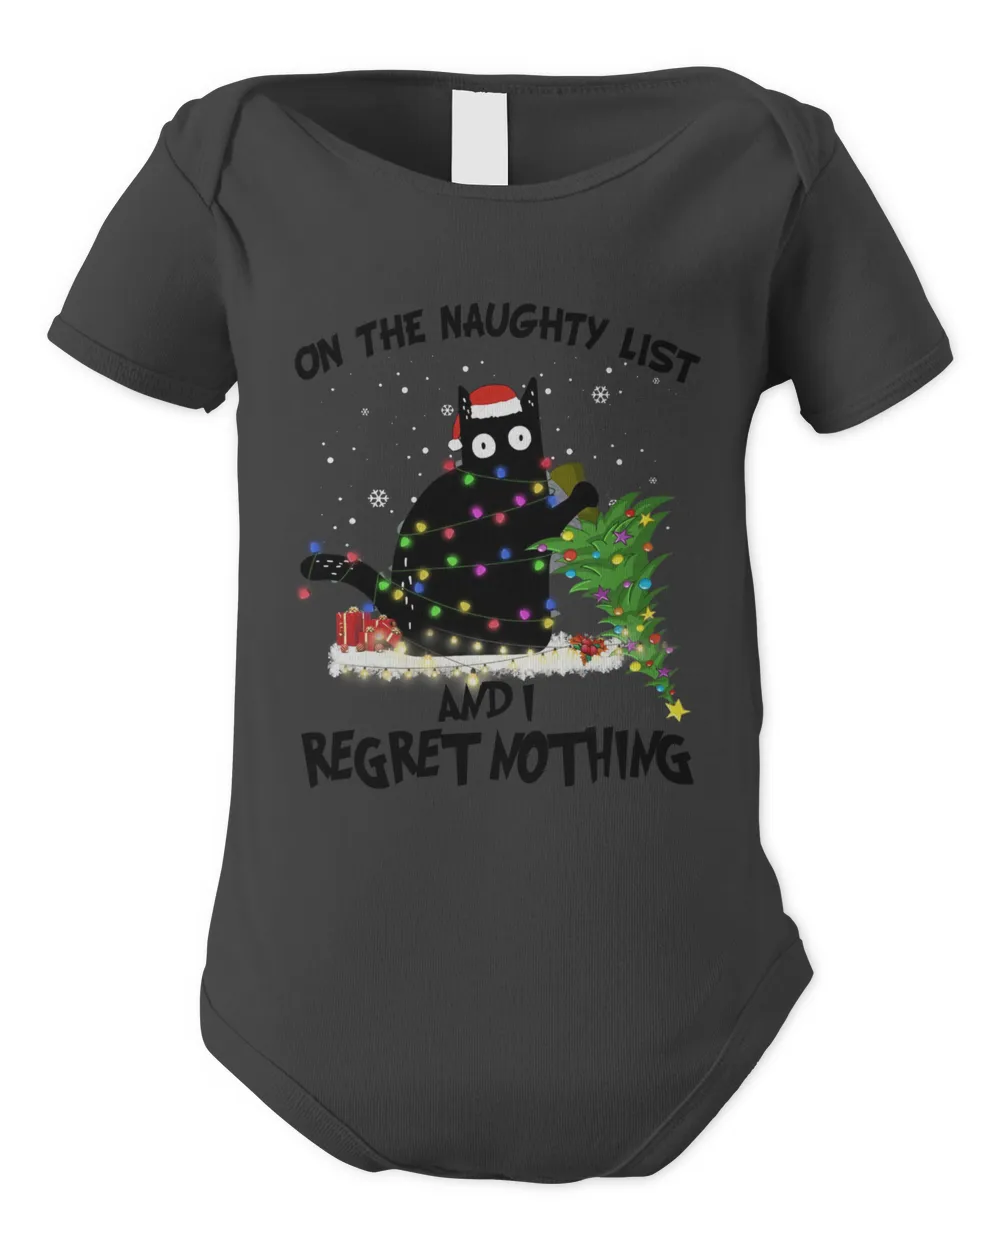 Black Cat Kitty On The Naughty List And I Regret Nothing Kitten Cat